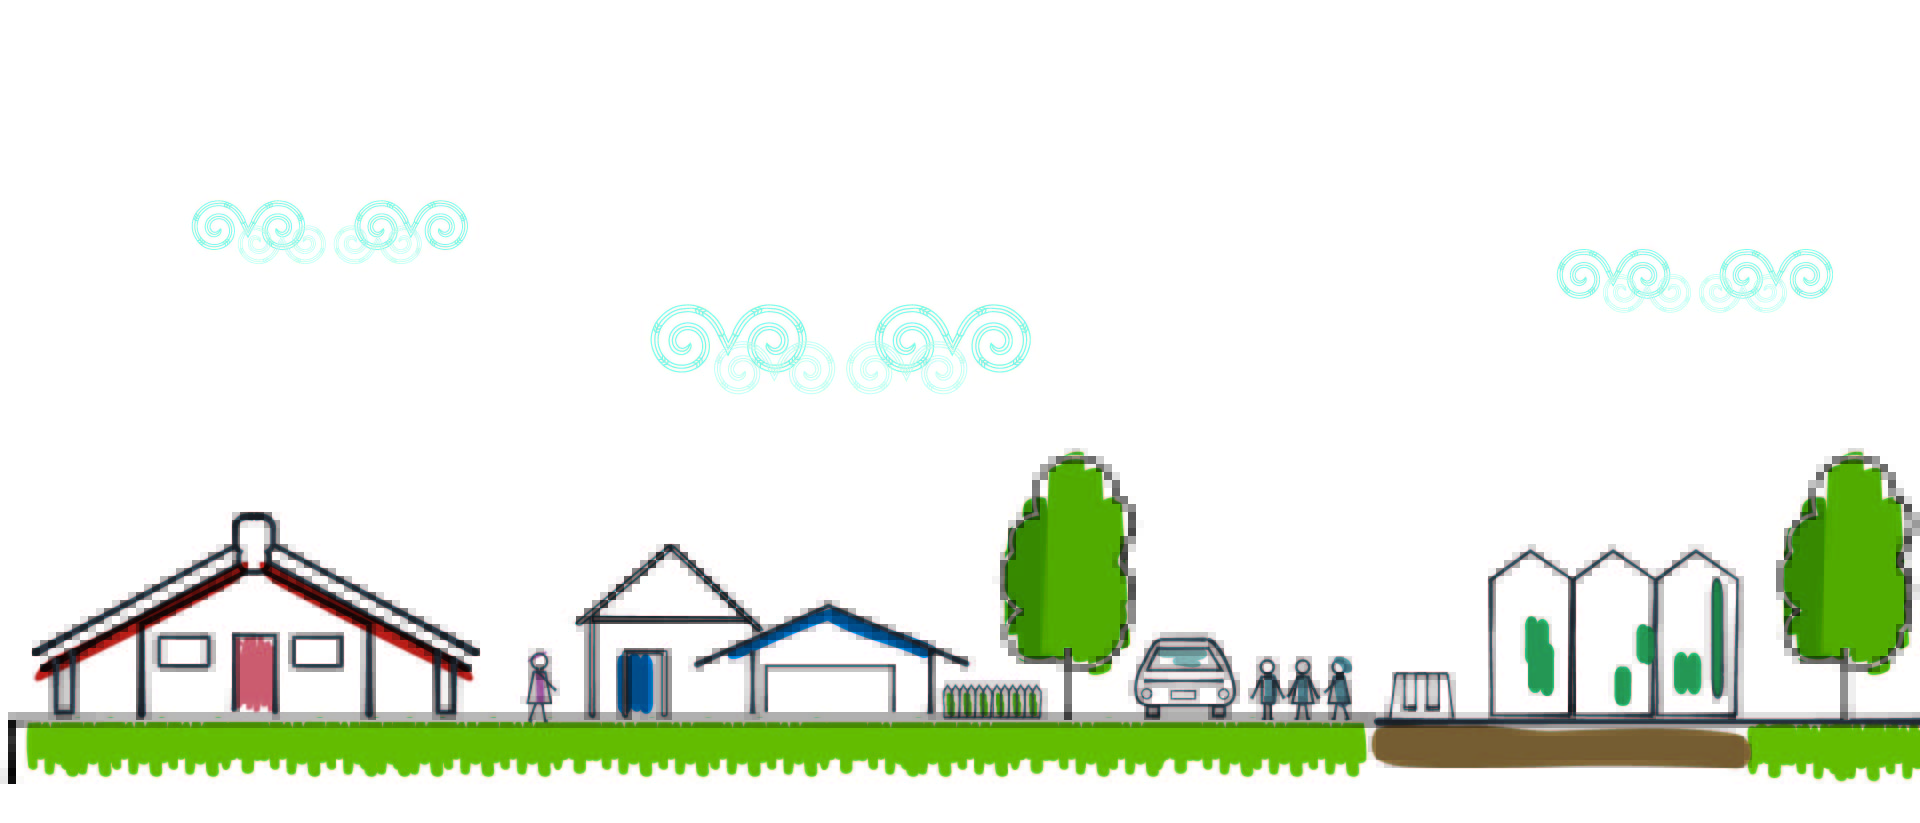 Illustration of a neighbourhood comprised of a marae, a residential house, tall buildings and a community park.